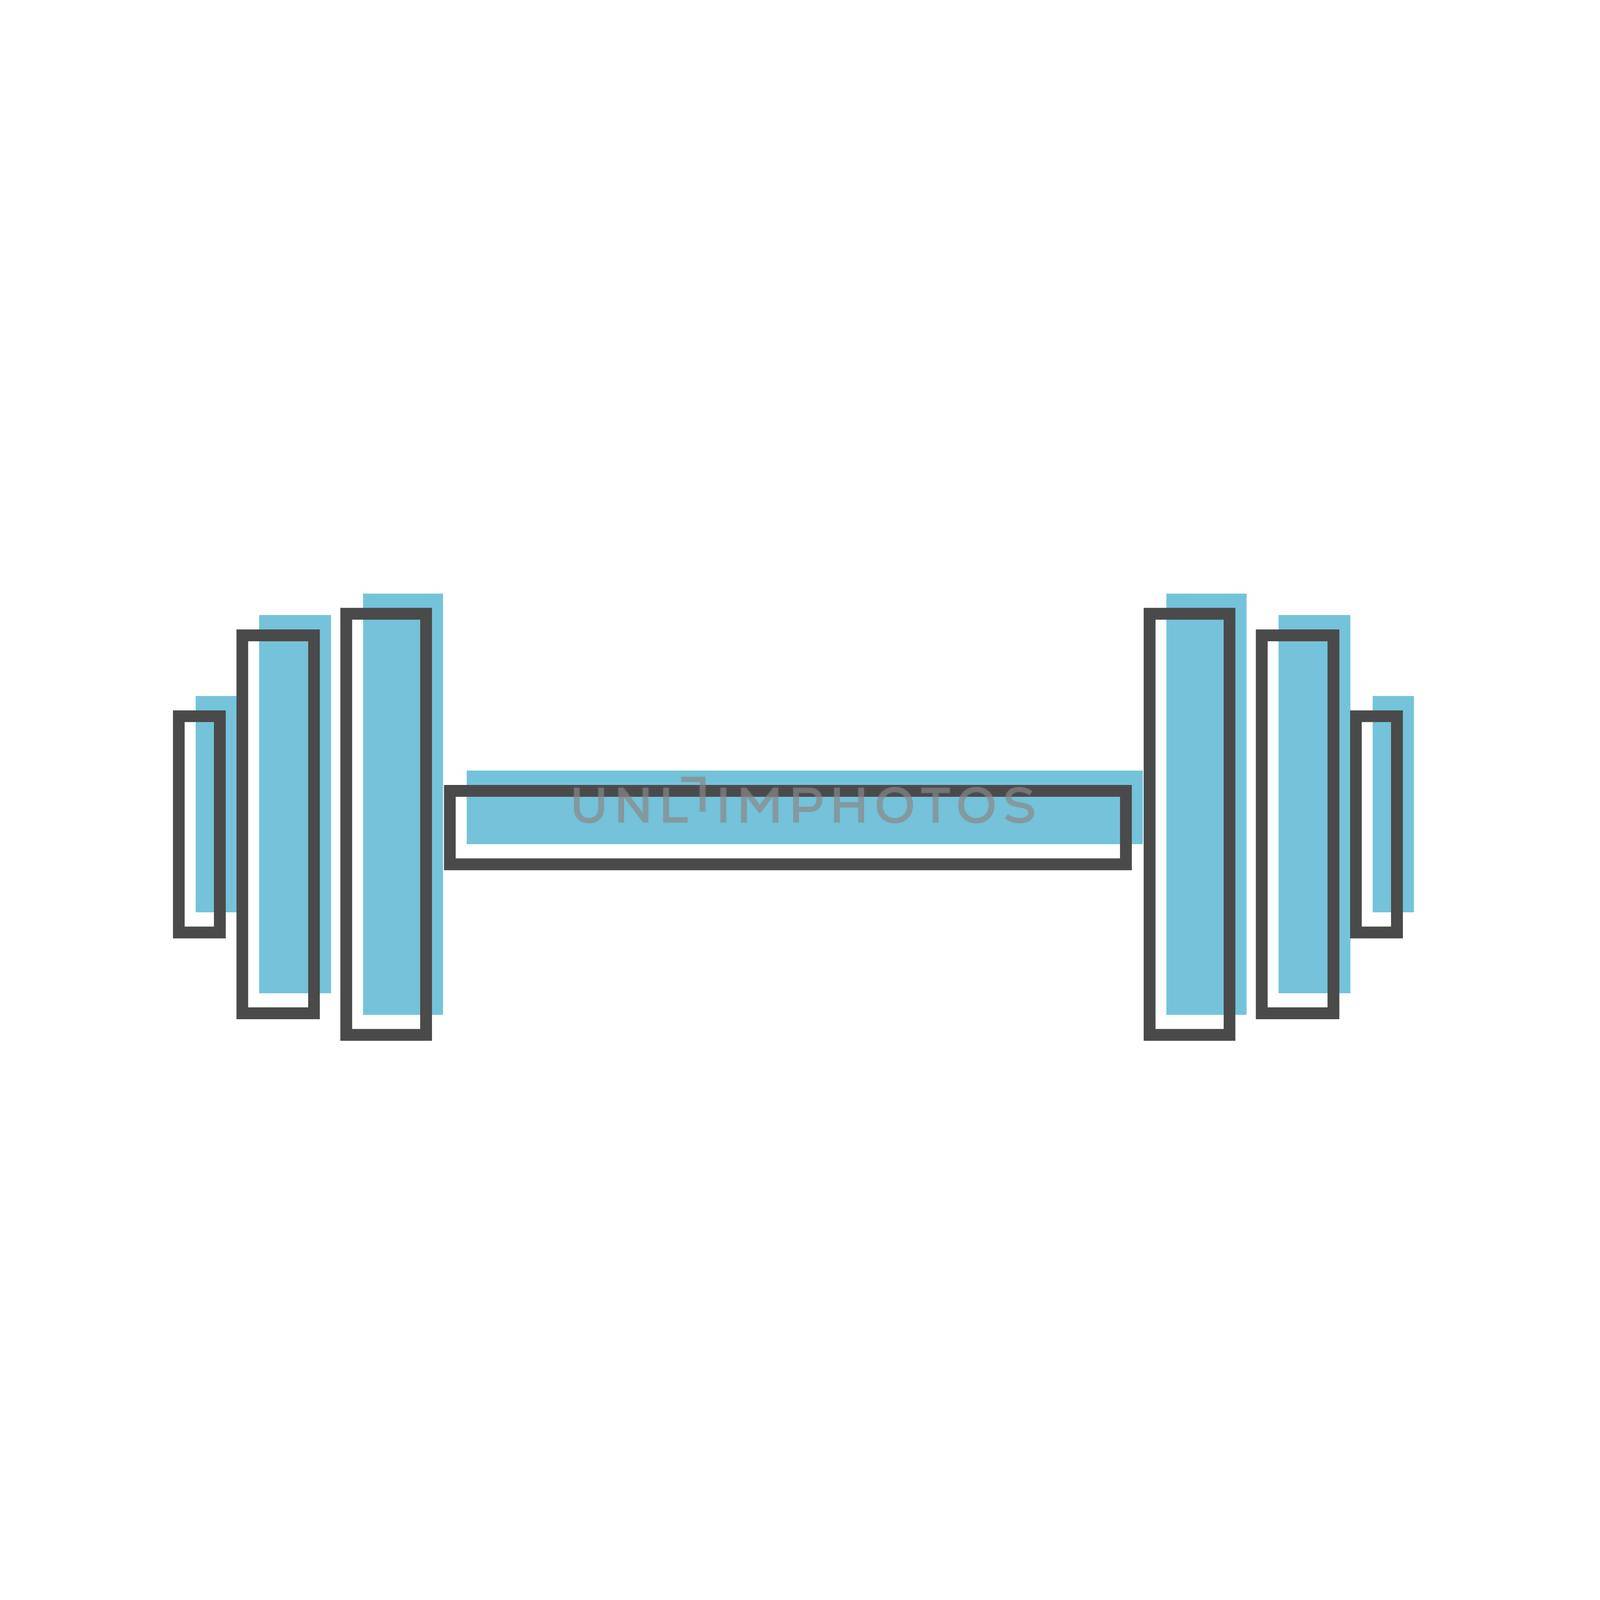 Illustration vector graphic of dumbbell. Simple flat icon by natali_brill